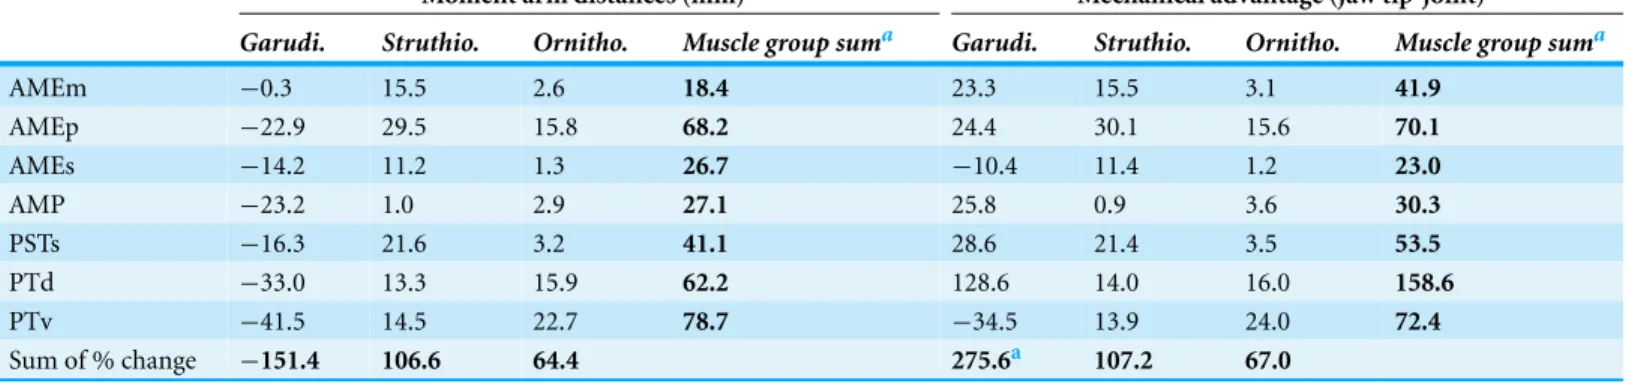 Table 5 Percentage change in muscle moment arms and mechanical advantage after retrodeformation.